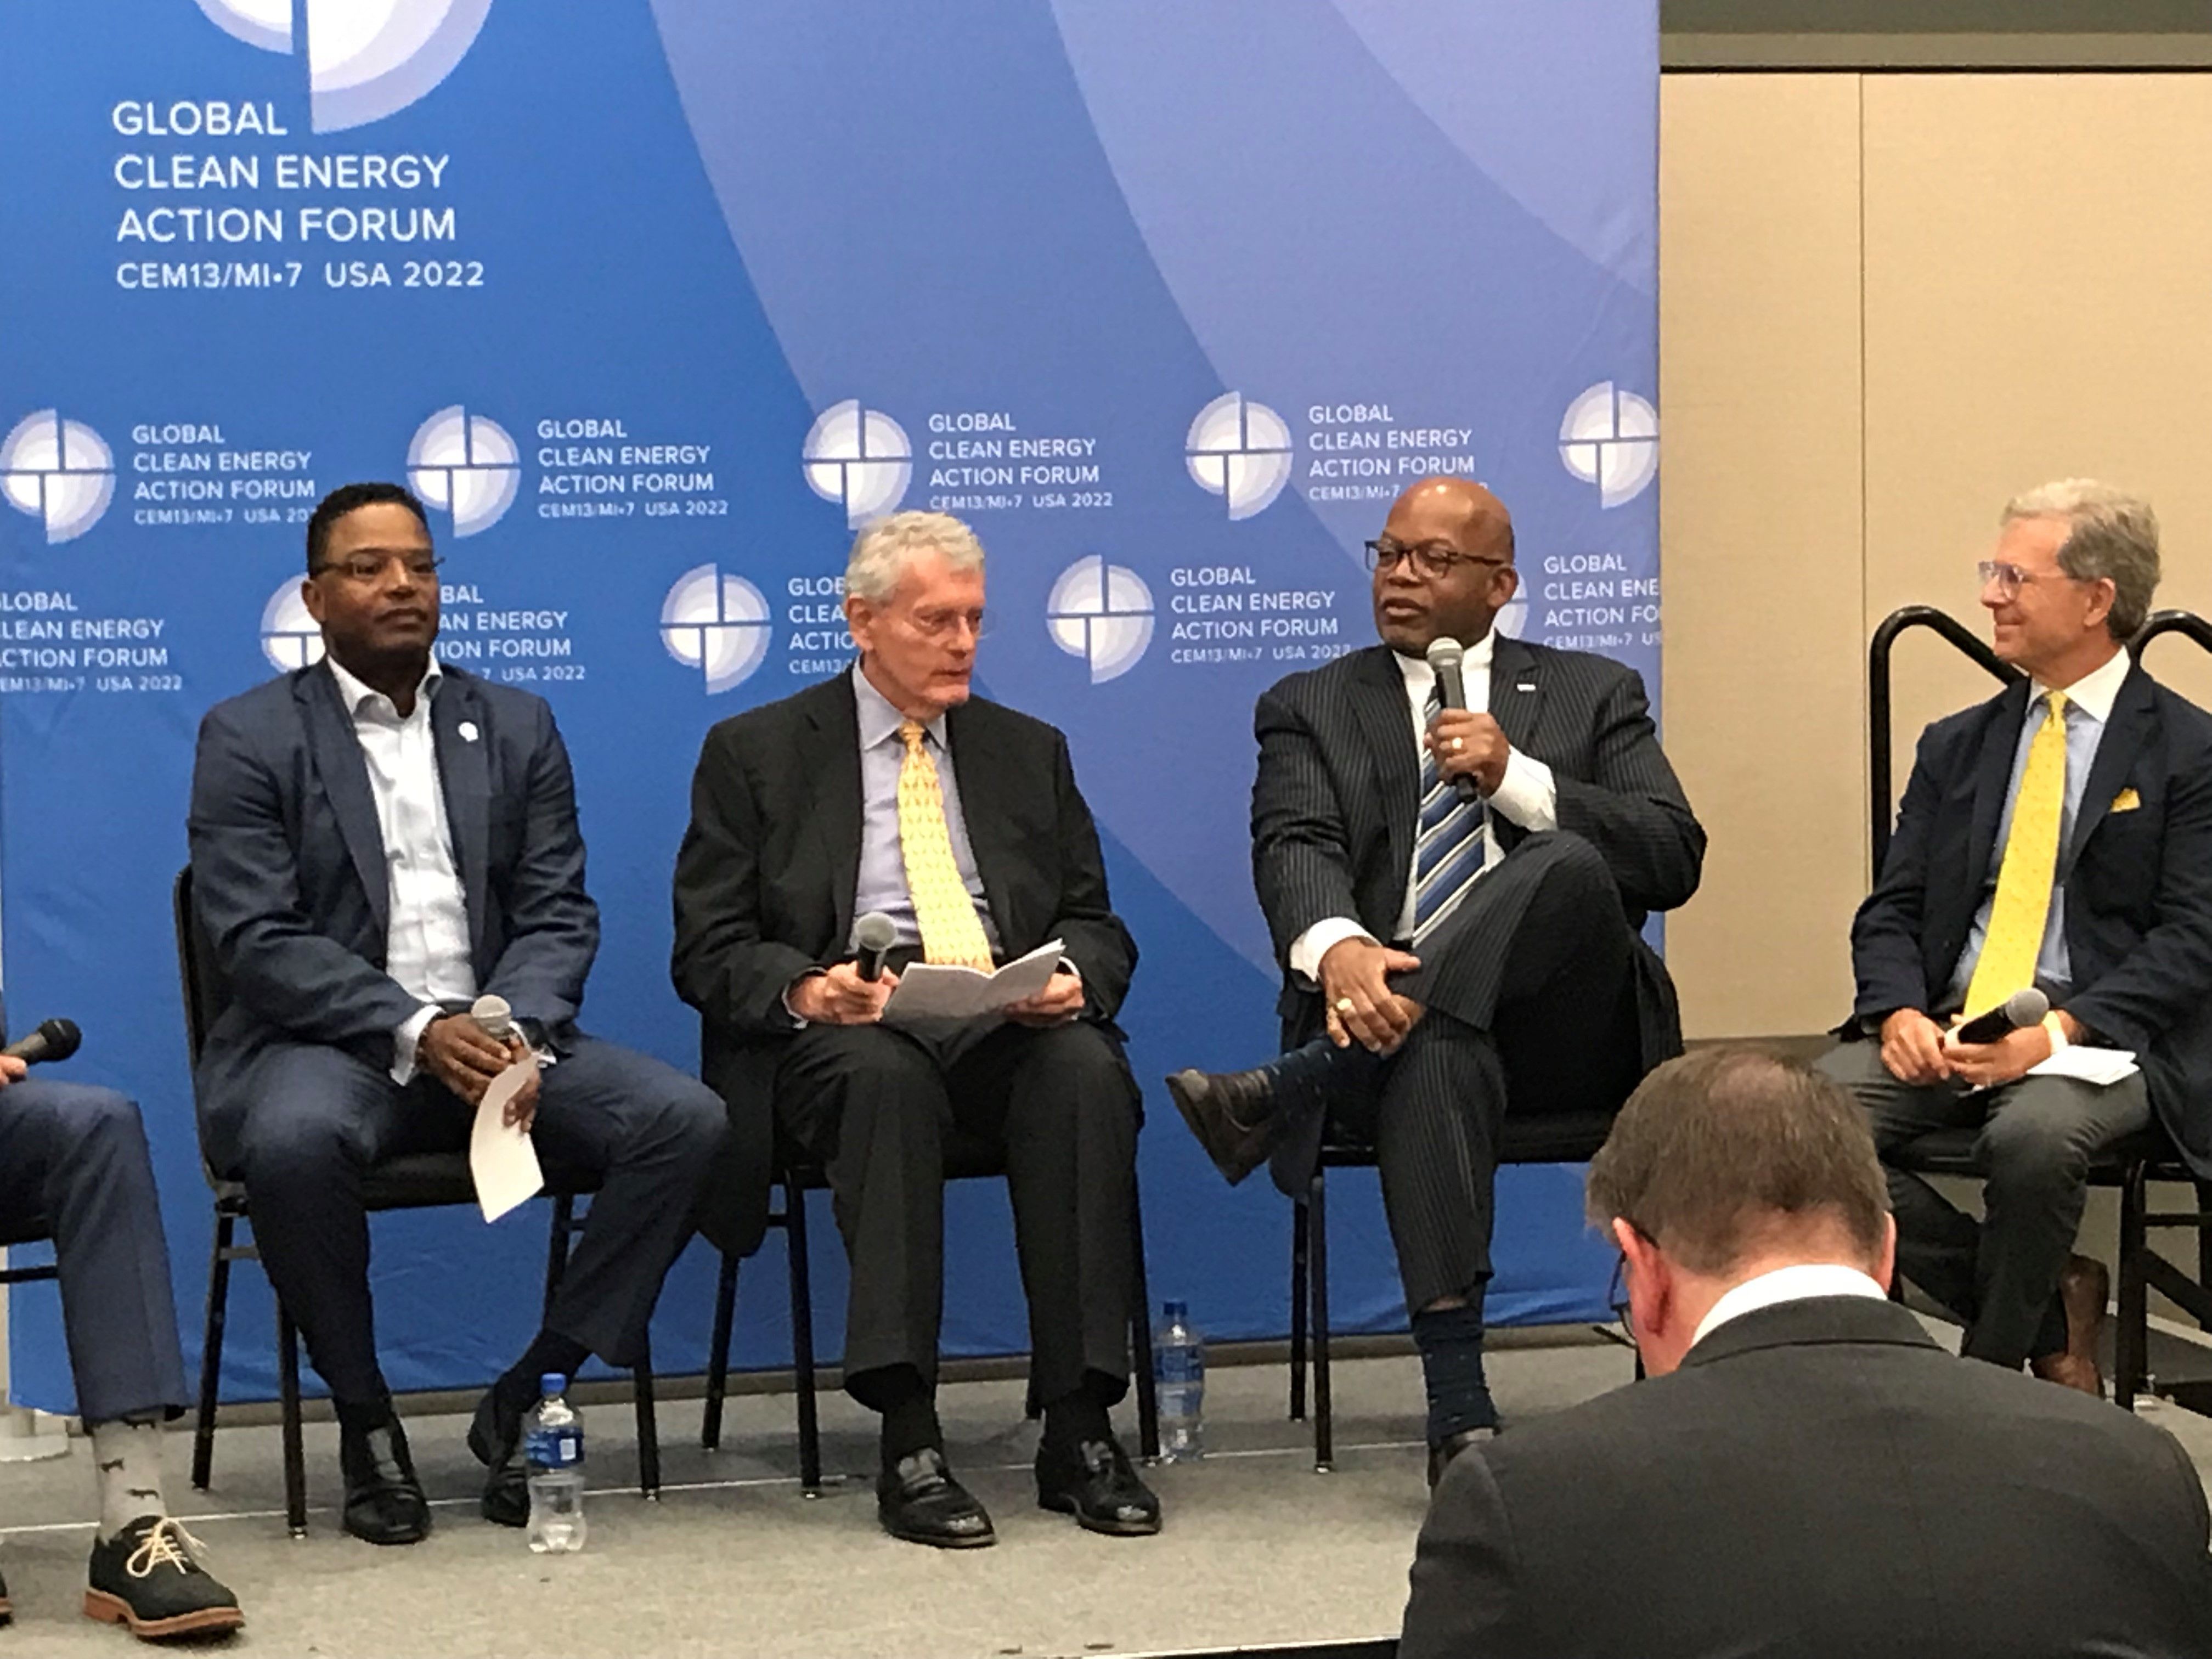 Duquesne Light Holdings President and CEO Kevin Walker speaks at a roundtable discussion at the Global Clean Energy Action Forum in Pittsburgh, PA on September 22, 2022.